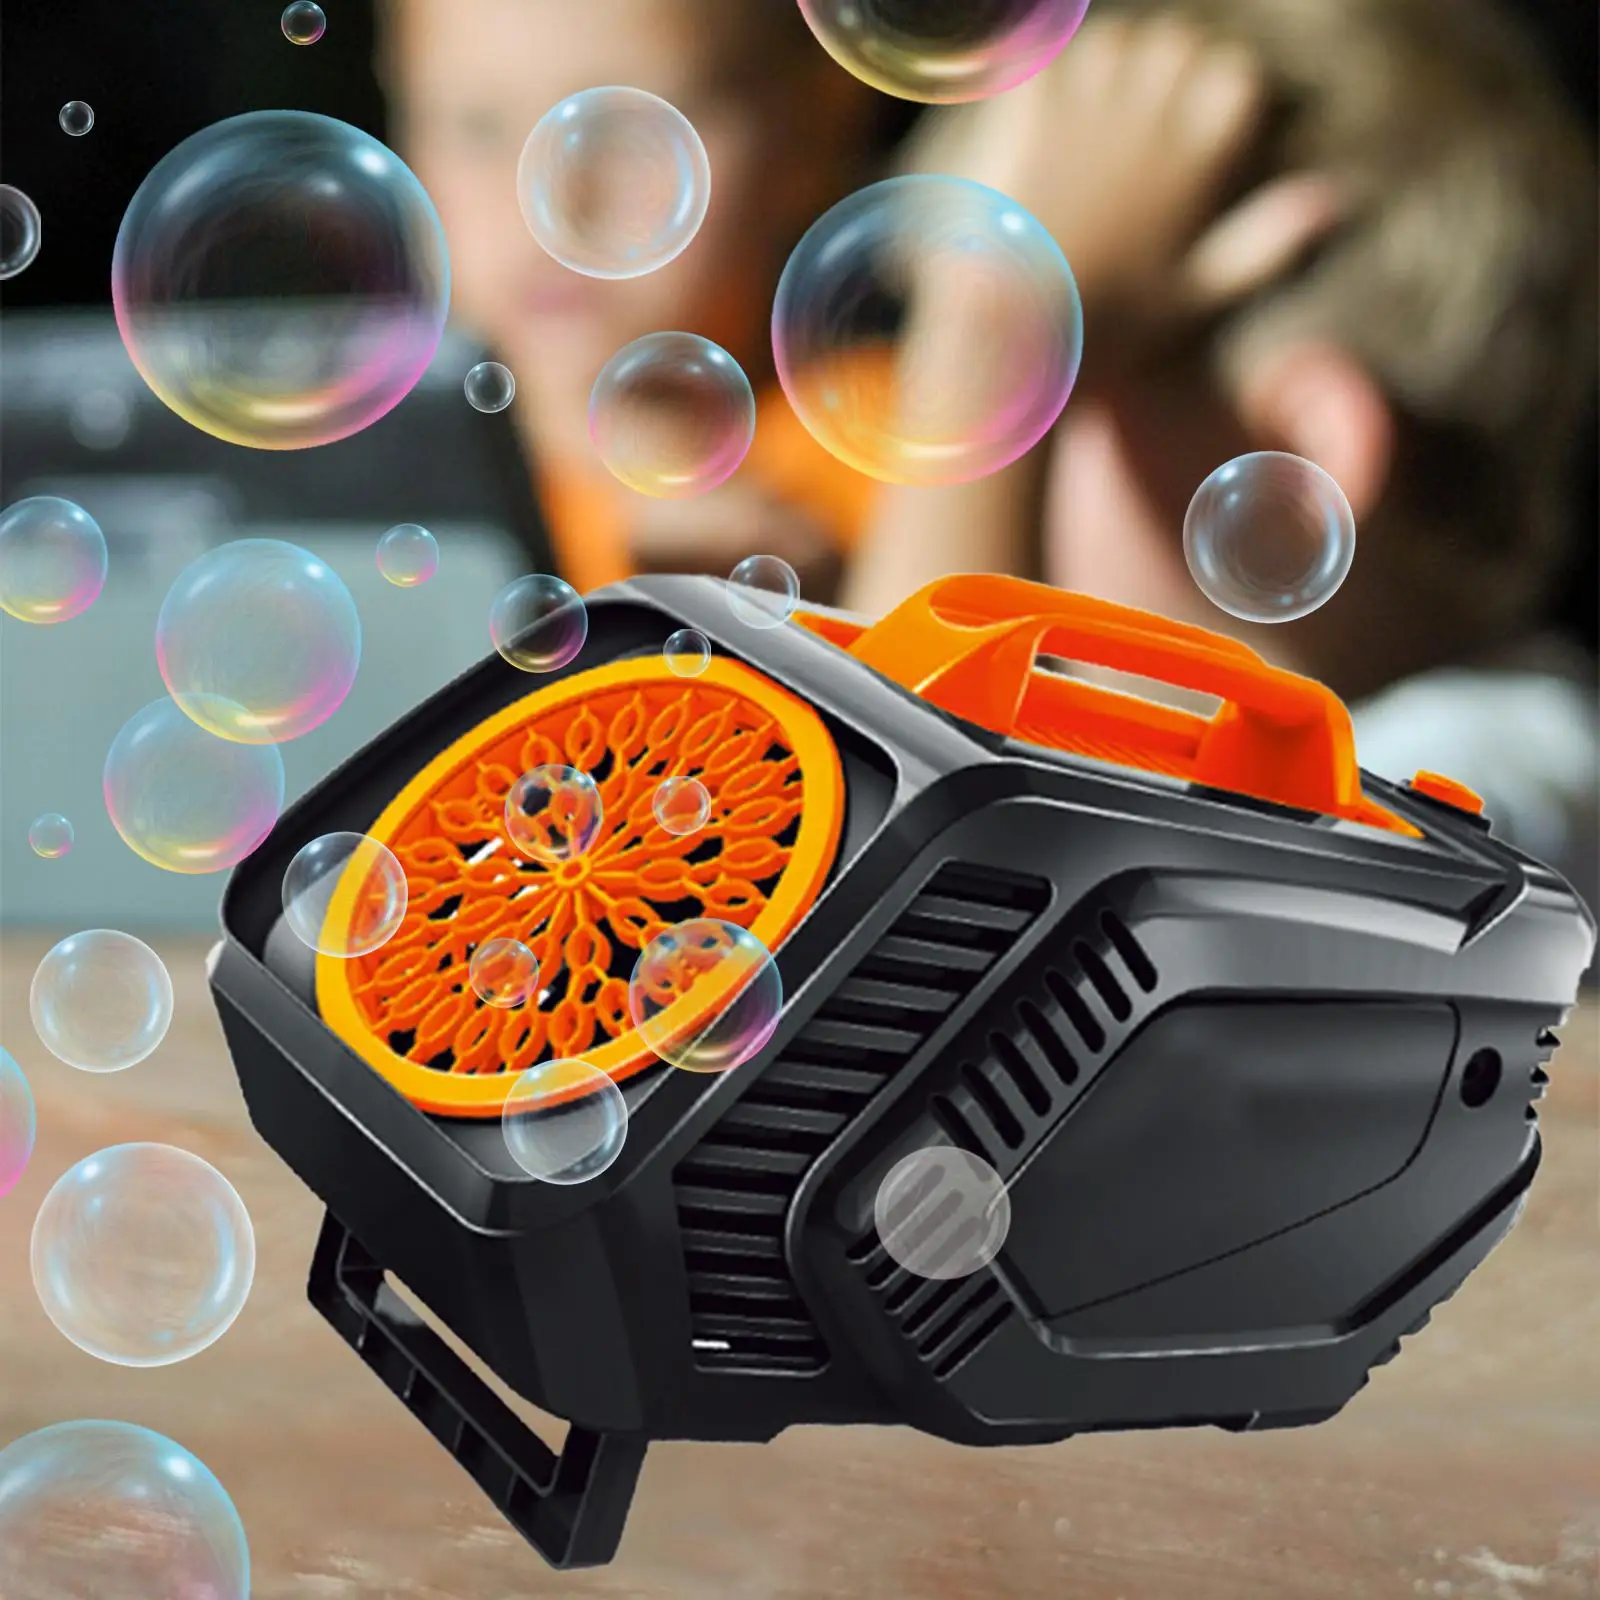 Electric Bubble Maker Machine Bubble Making Toy 2 Adjustable Gears Bath Toy for Outdoor Summer Birthday Party Favors Toddlers